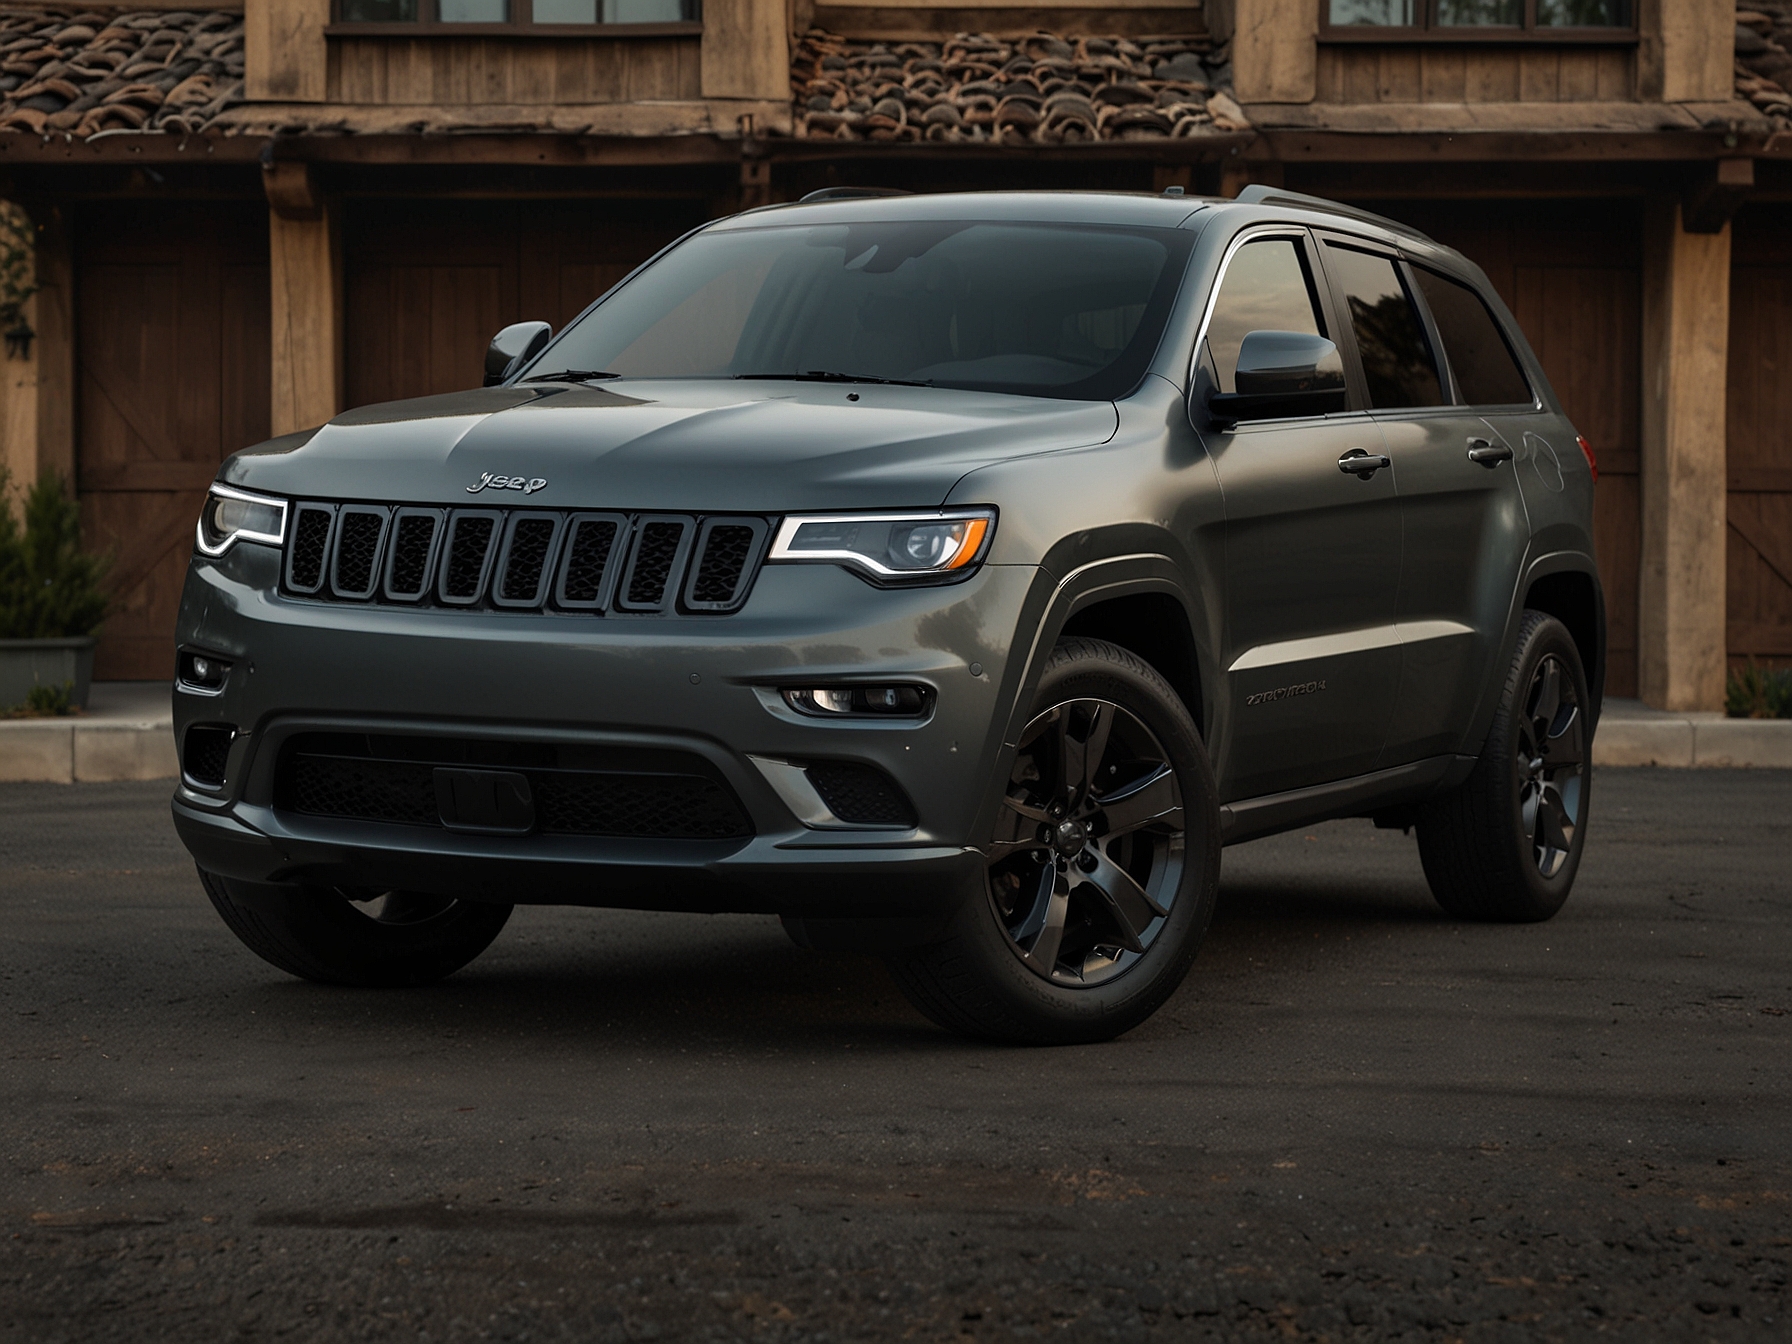 The exterior of the 2024 Jeep Grand Cherokee showcases sleek lines, a bold stance, and the signature seven-slot grille with redesigned LED headlights. Available in multiple color options, it features 20-inch alloy wheels.